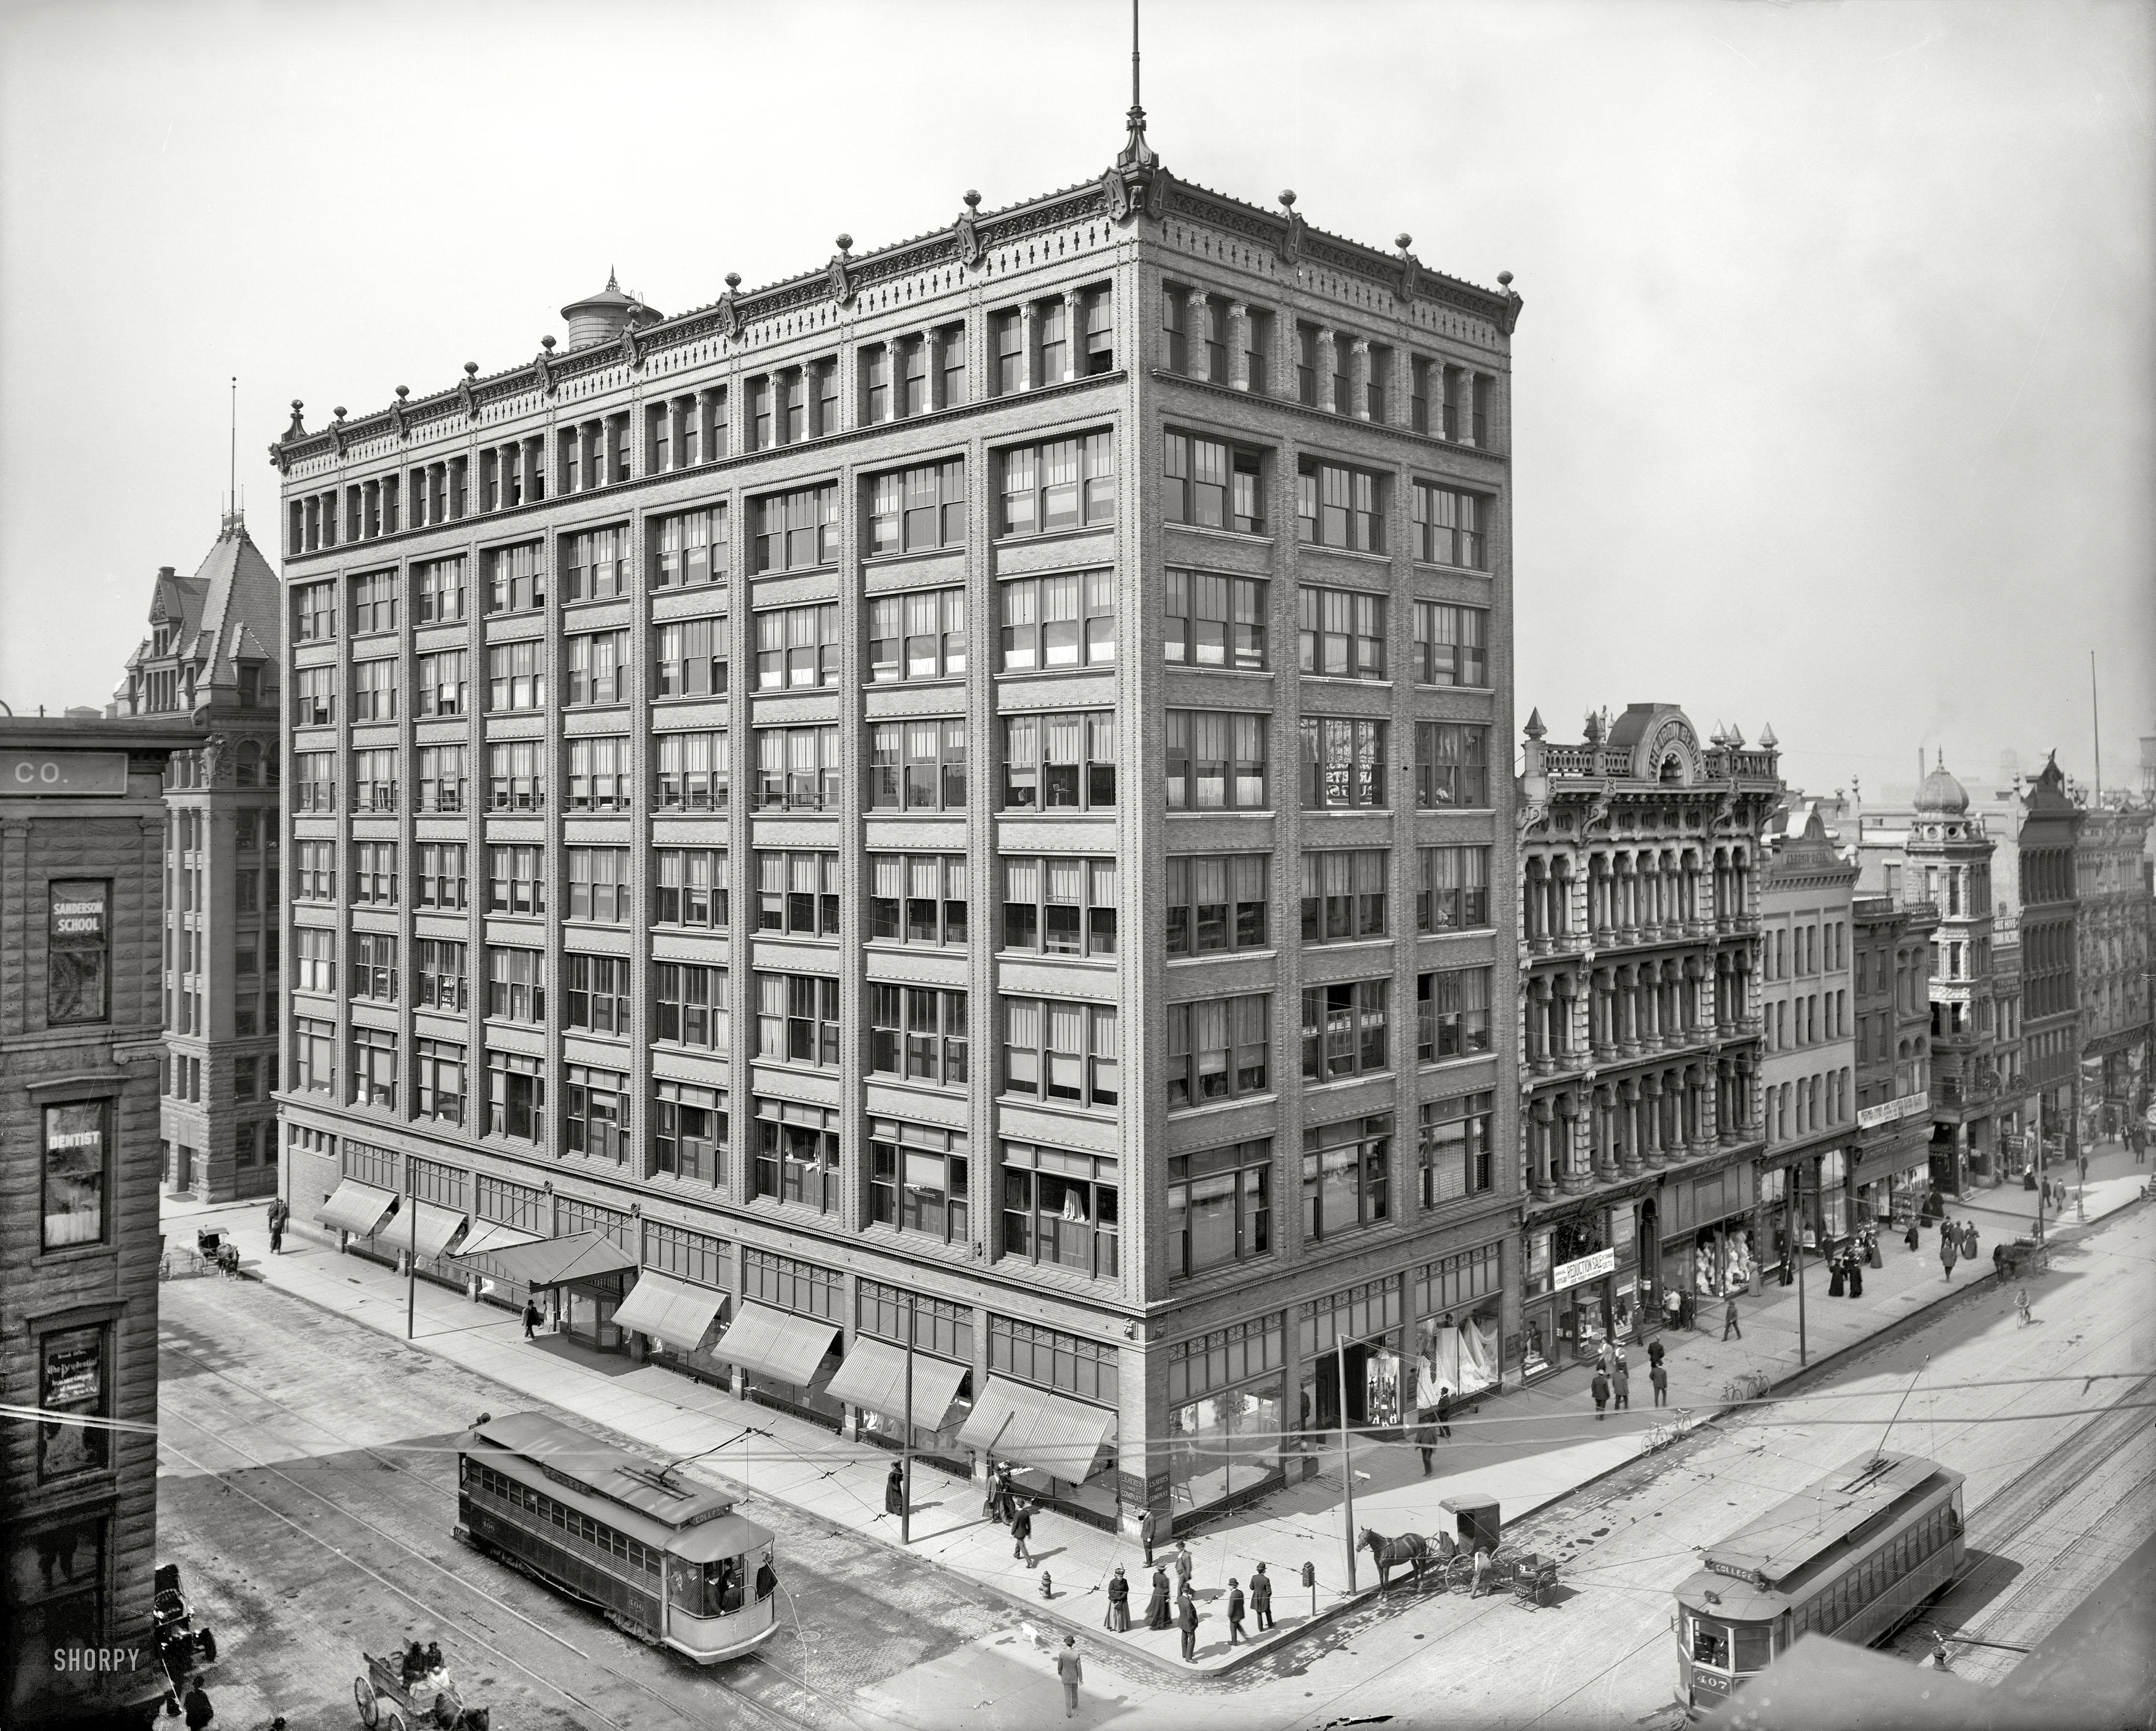 Circa 1905. "The Ayres Building, Indianapolis, Indiana." The L.S. Ayres & Co. department store. 8x10 glass negative, Detroit Publishing Co. View full size.